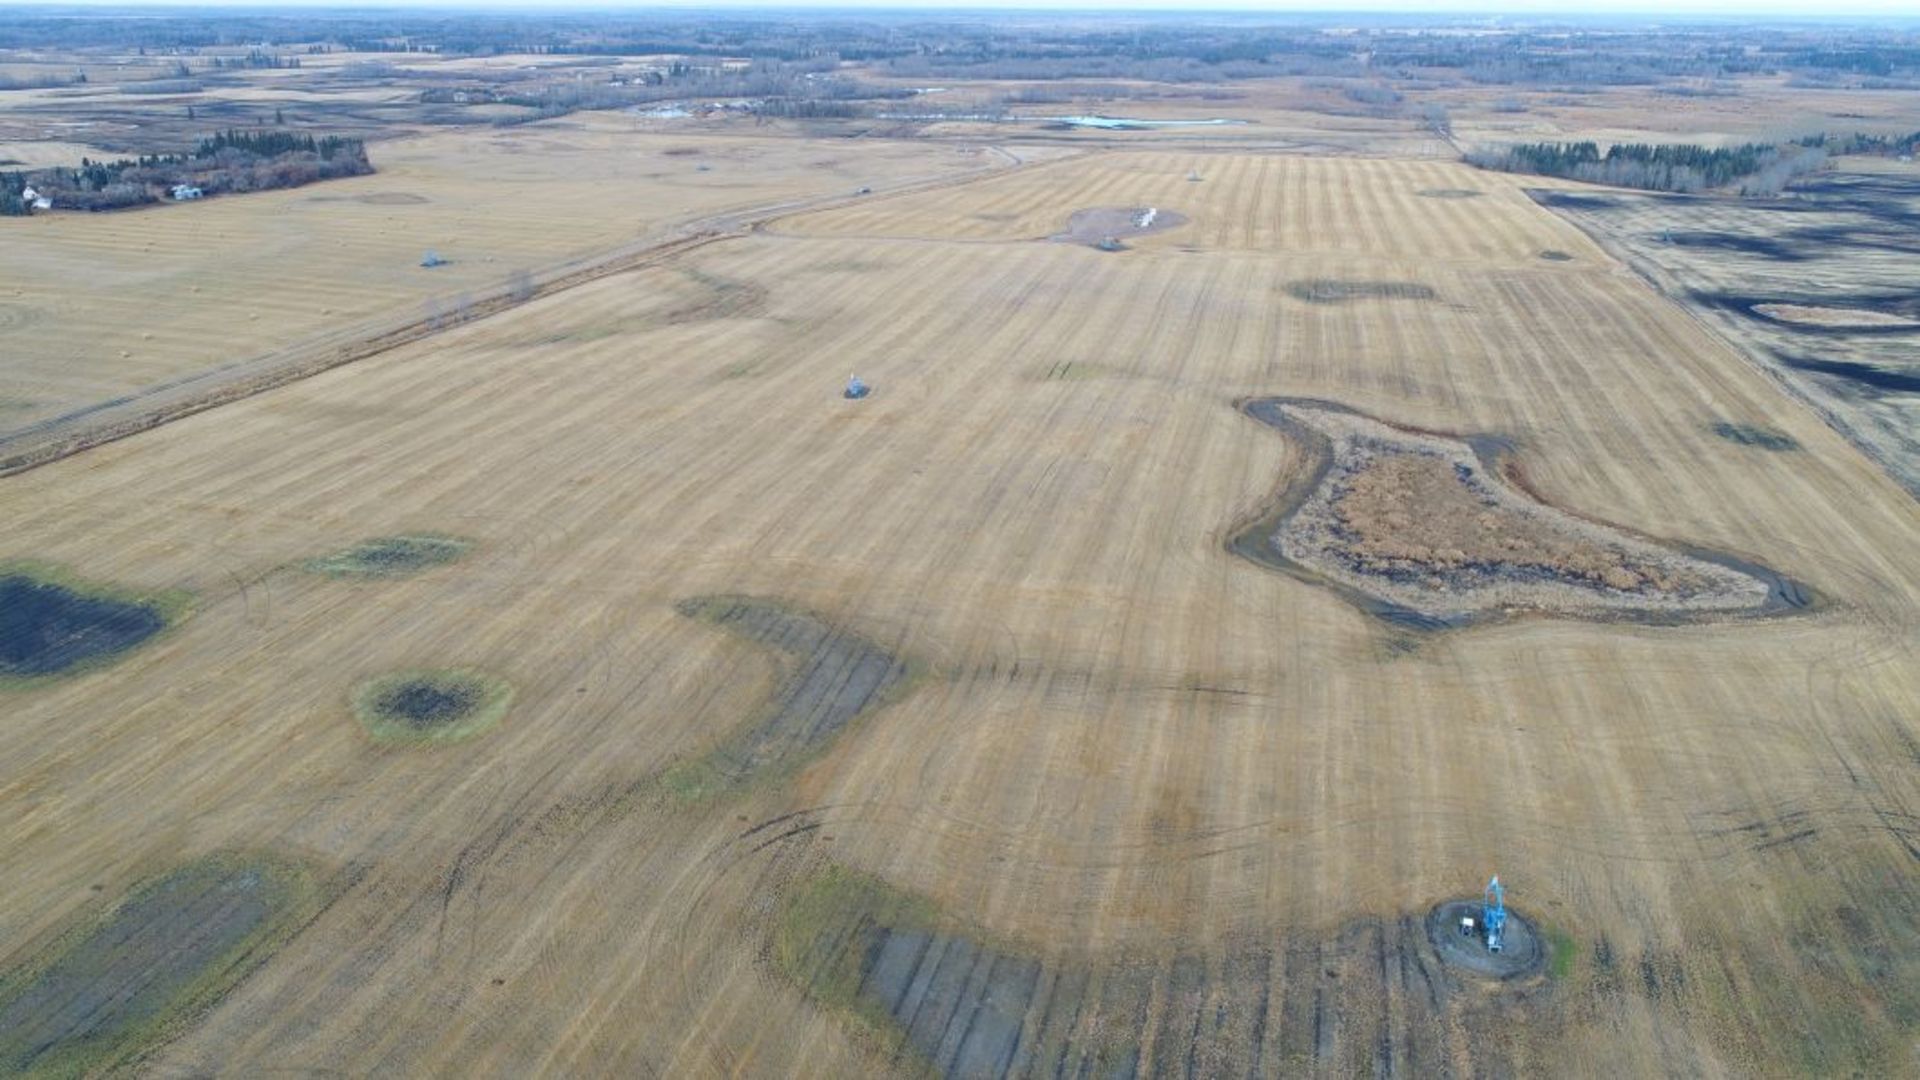 160+/- Total Acres NW 8-56-20-W4, Bruderheim, AB, consisting of Crop Land, Surface Lease & Yard Site - Image 13 of 34